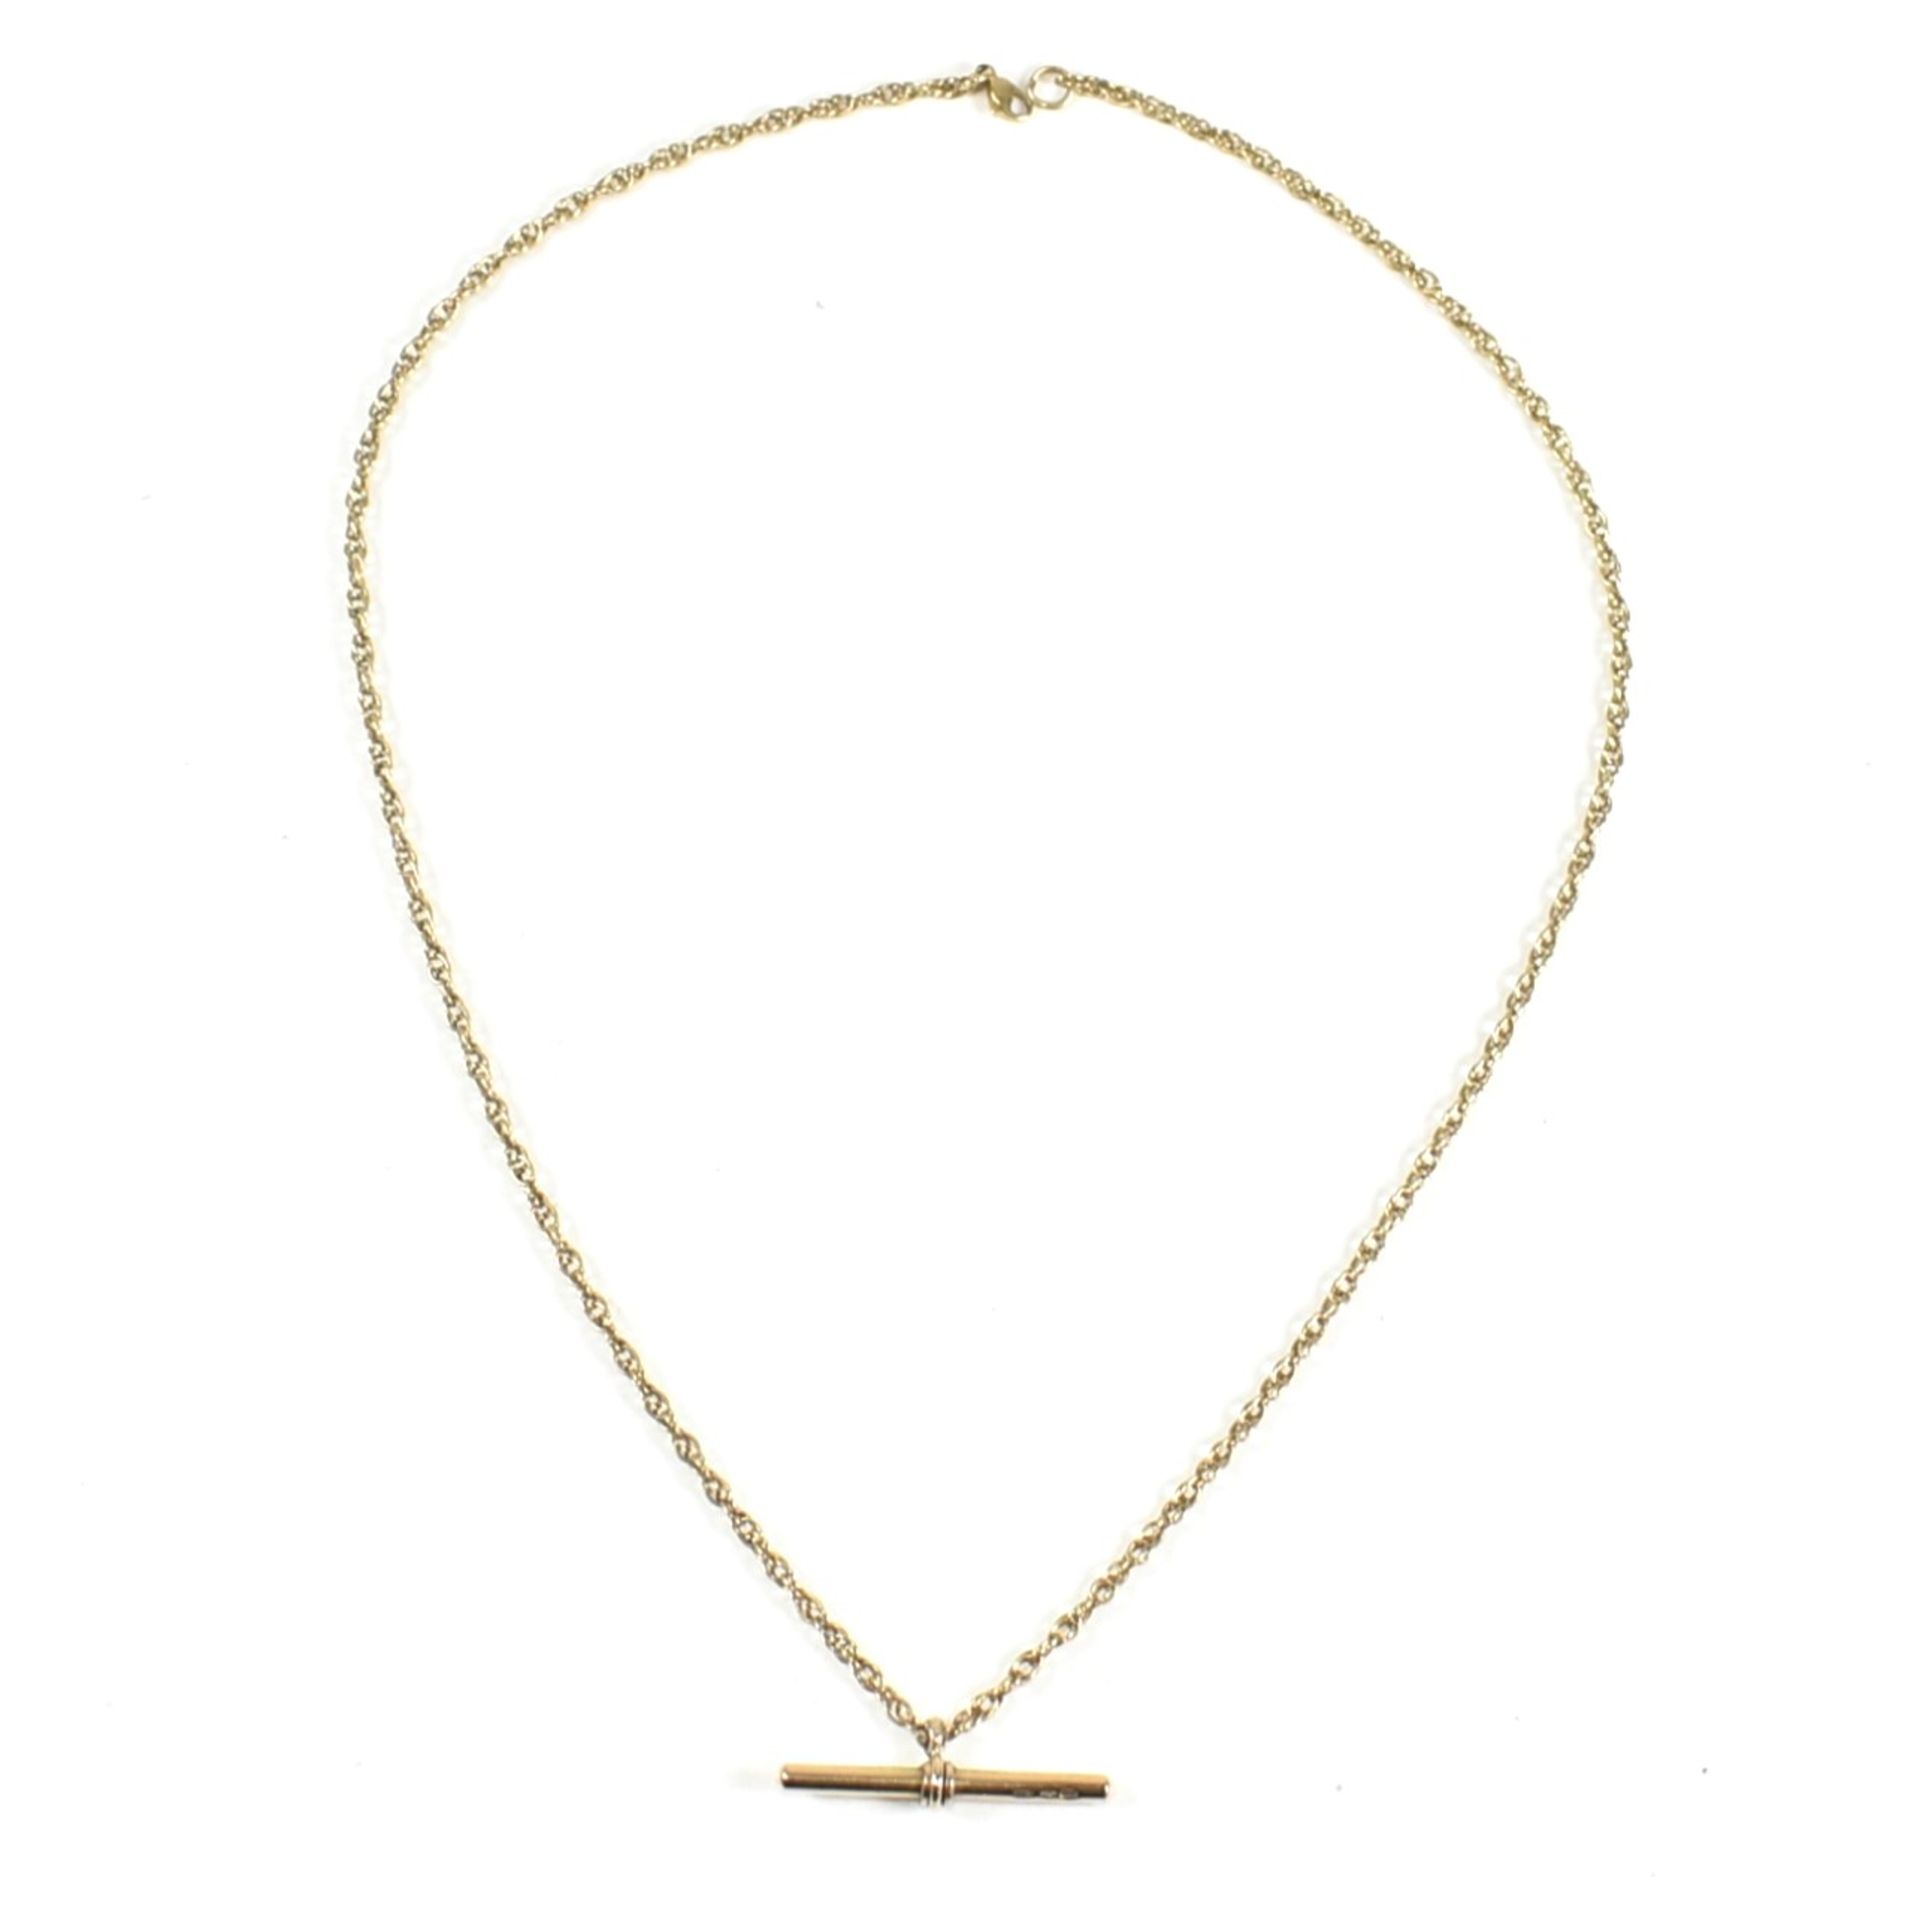 HALLMARKED 9CT GOLD T-BAR NECKLACE - Image 2 of 5